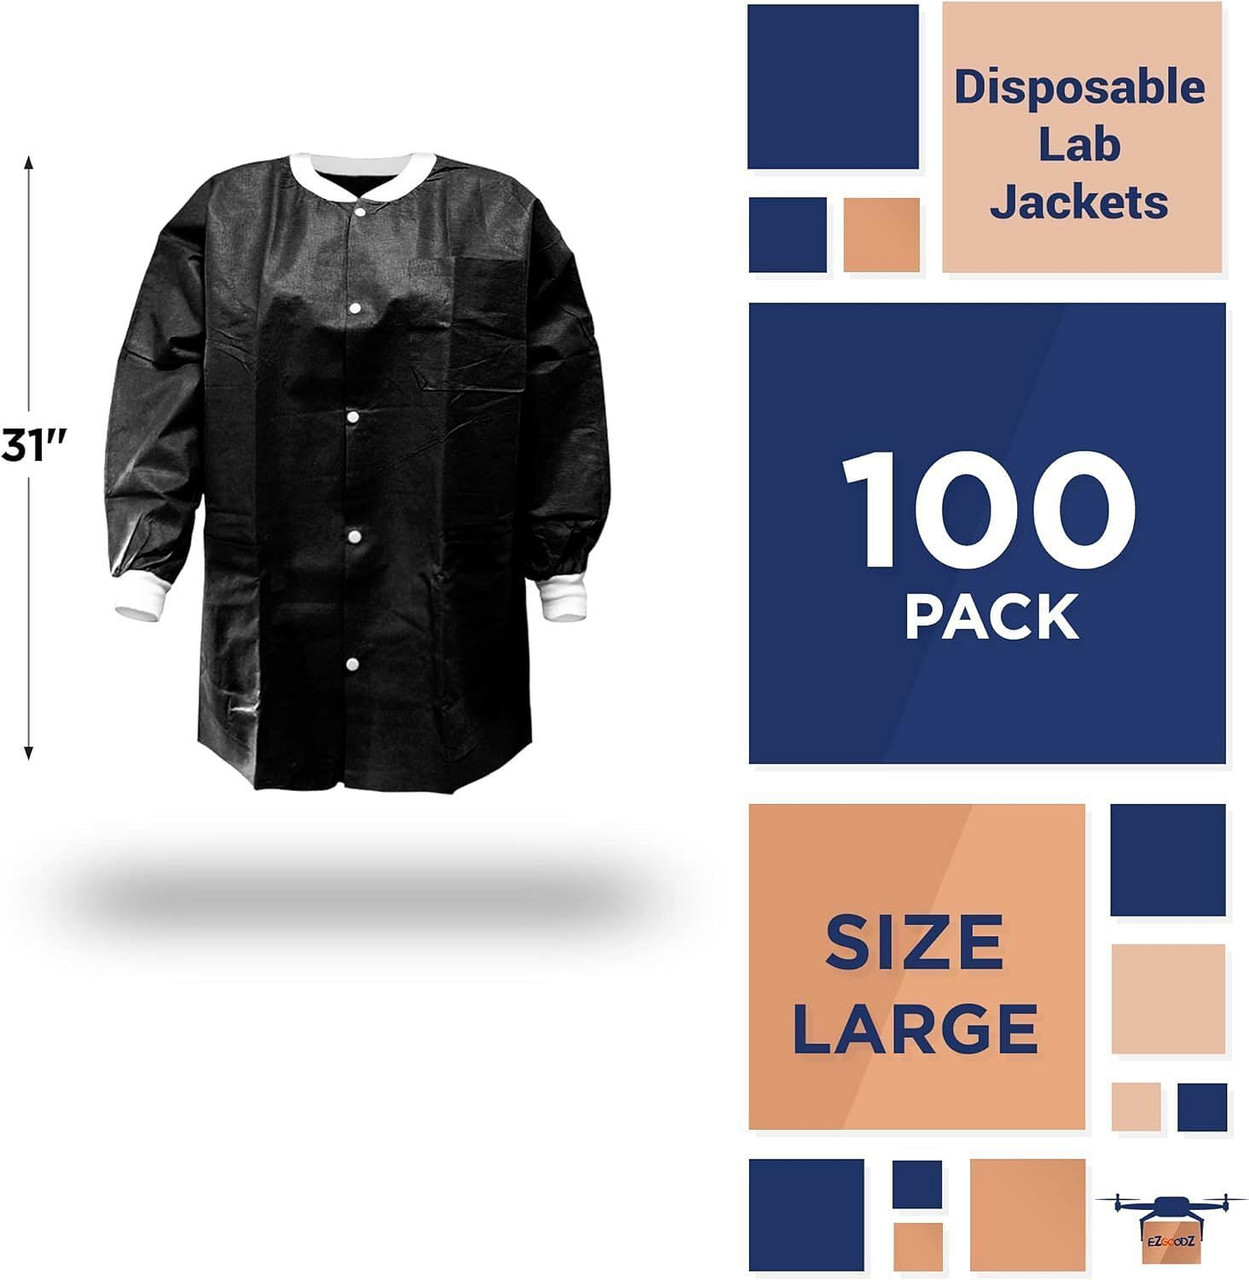 Disposable Lab Jackets; 31" Long. Pack of 100 Black Hip-Length Work Gowns Large. SMS 50 gsm Shirts 